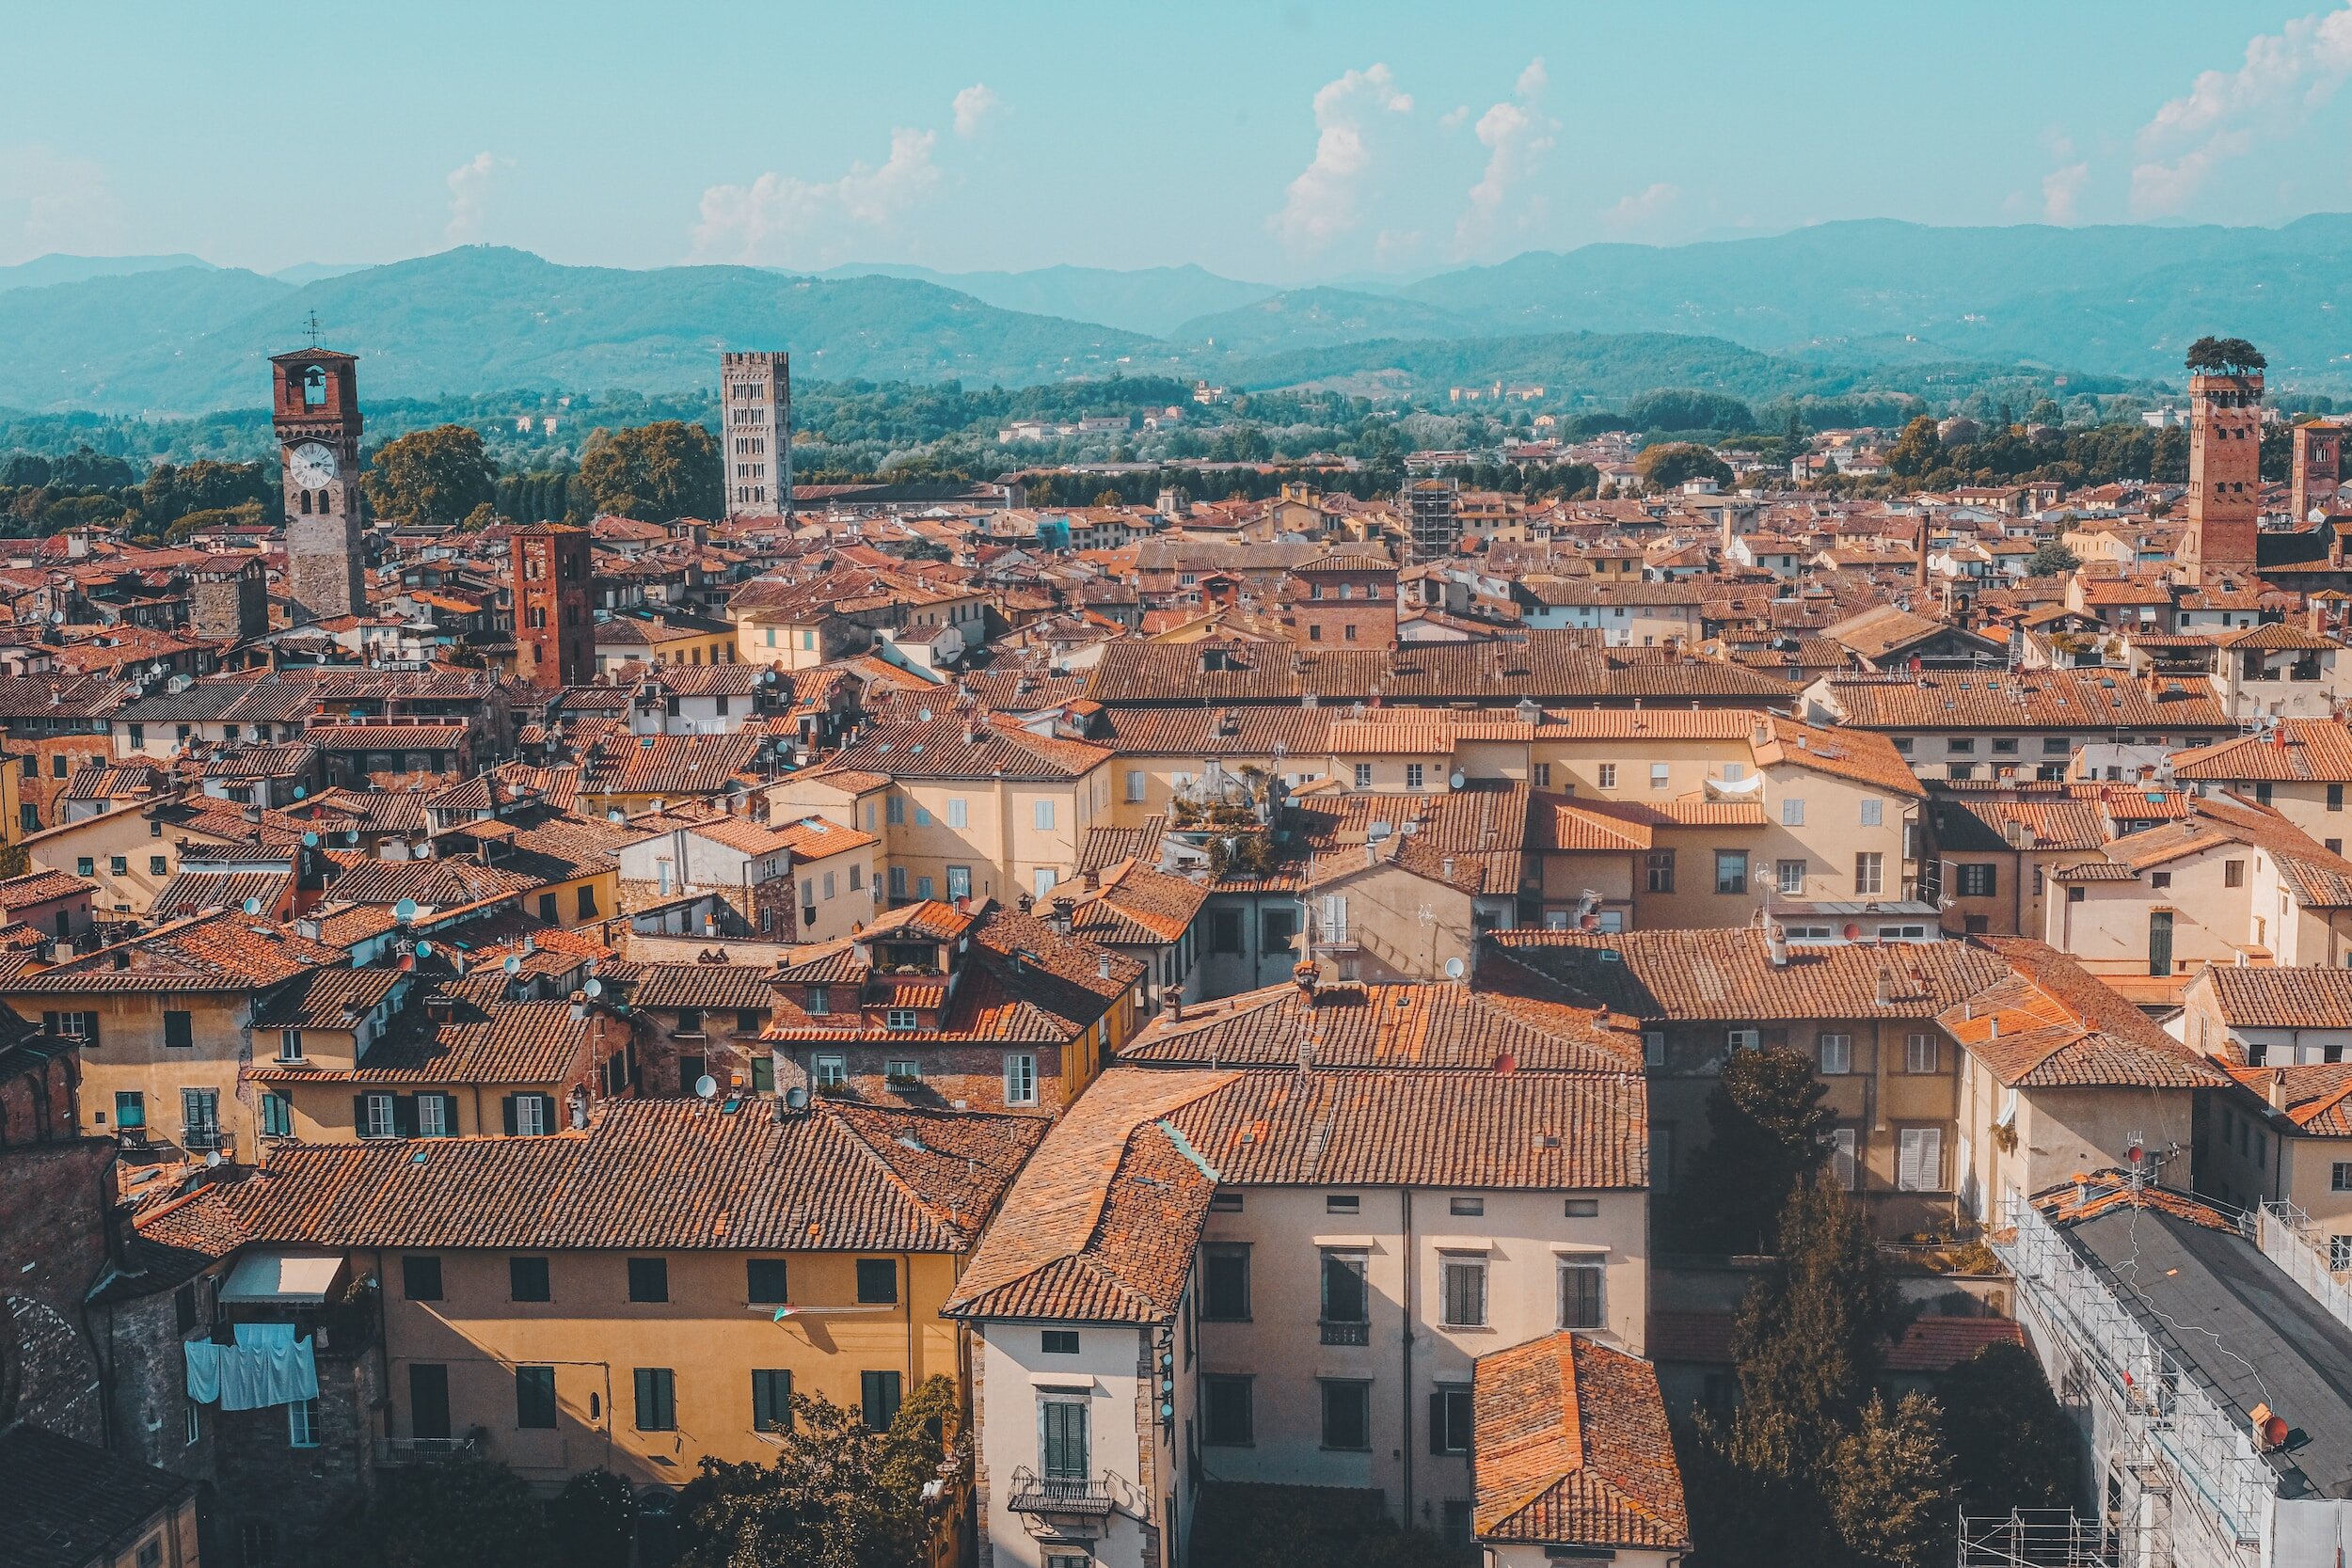 An aerial view over the red roofs of the city of Lucca, with tree-covered hills in the distant background